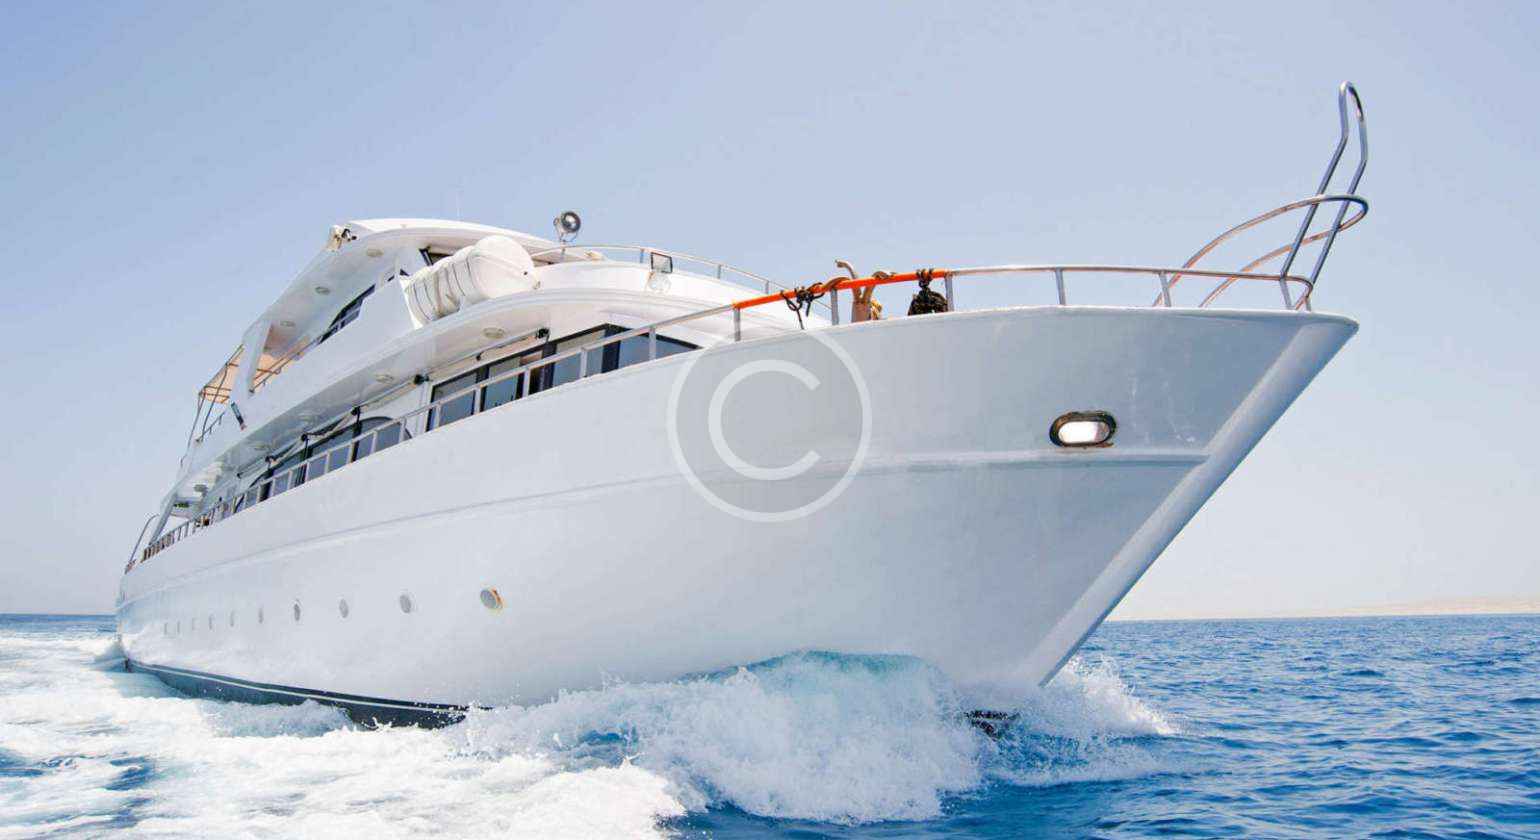 Discounted Winter Charters